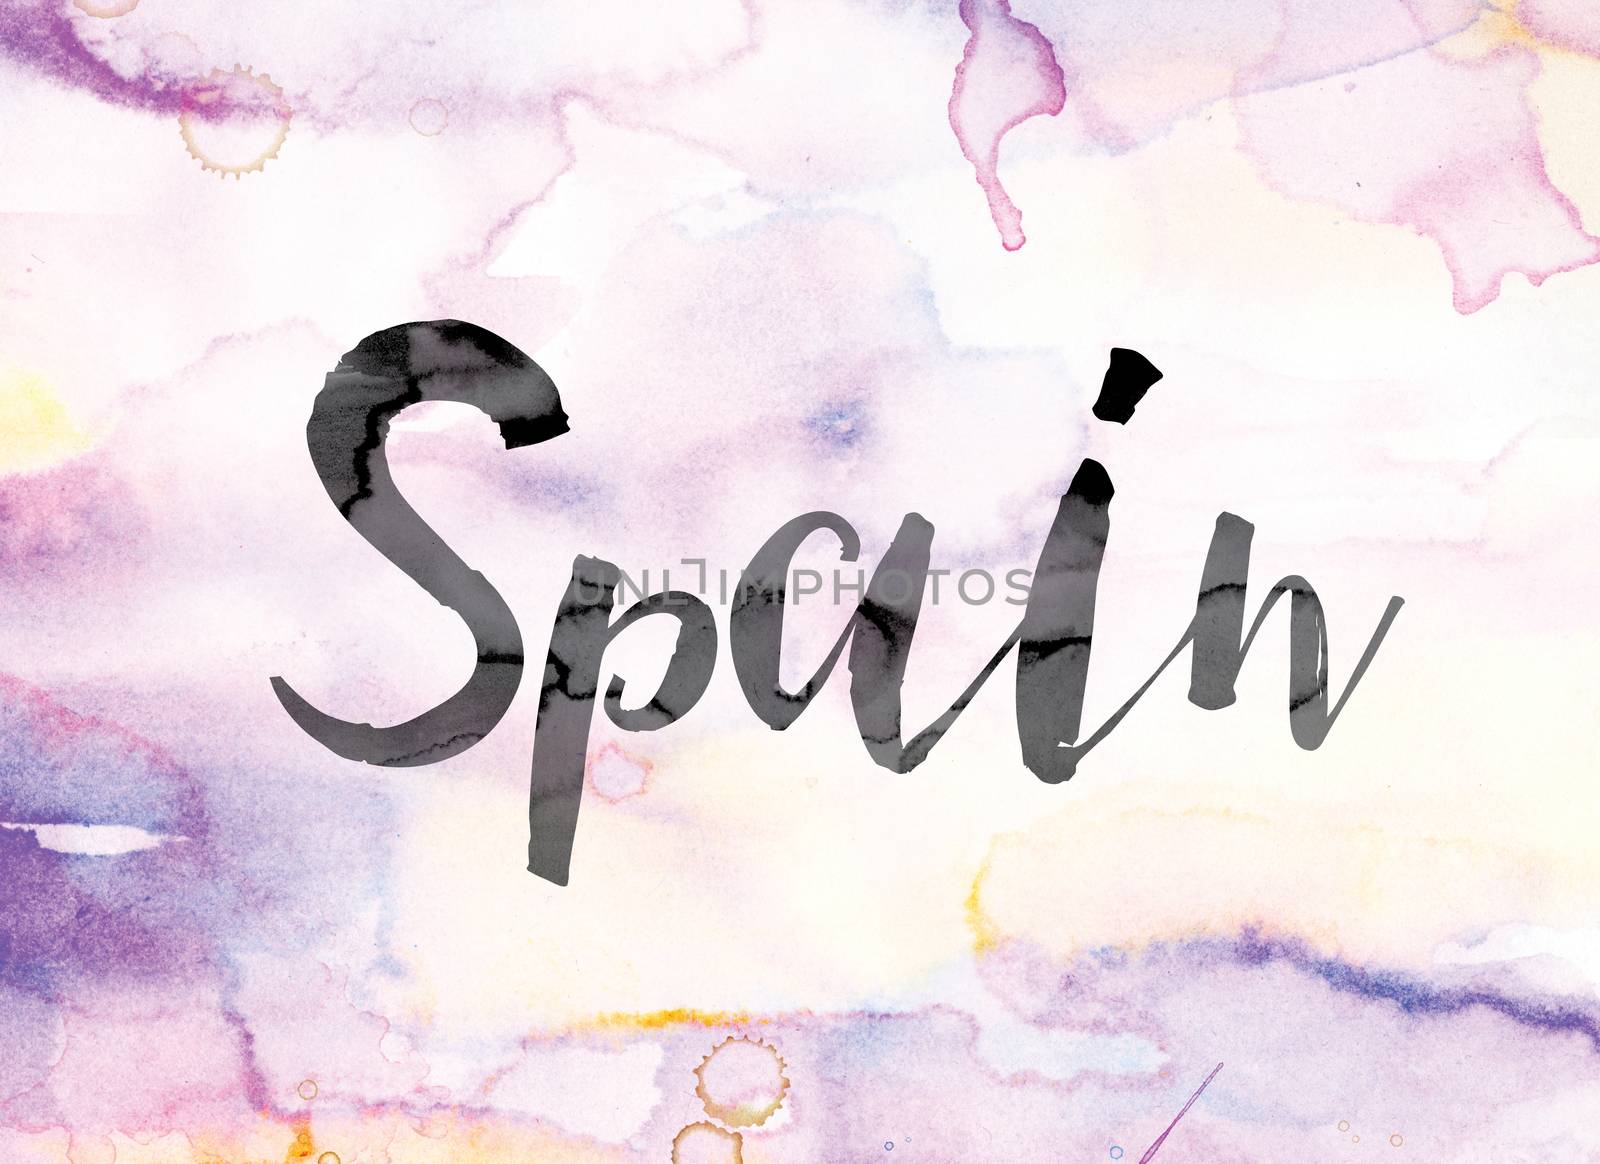 The word "Spain" painted in black ink over a colorful watercolor washed background concept and theme.